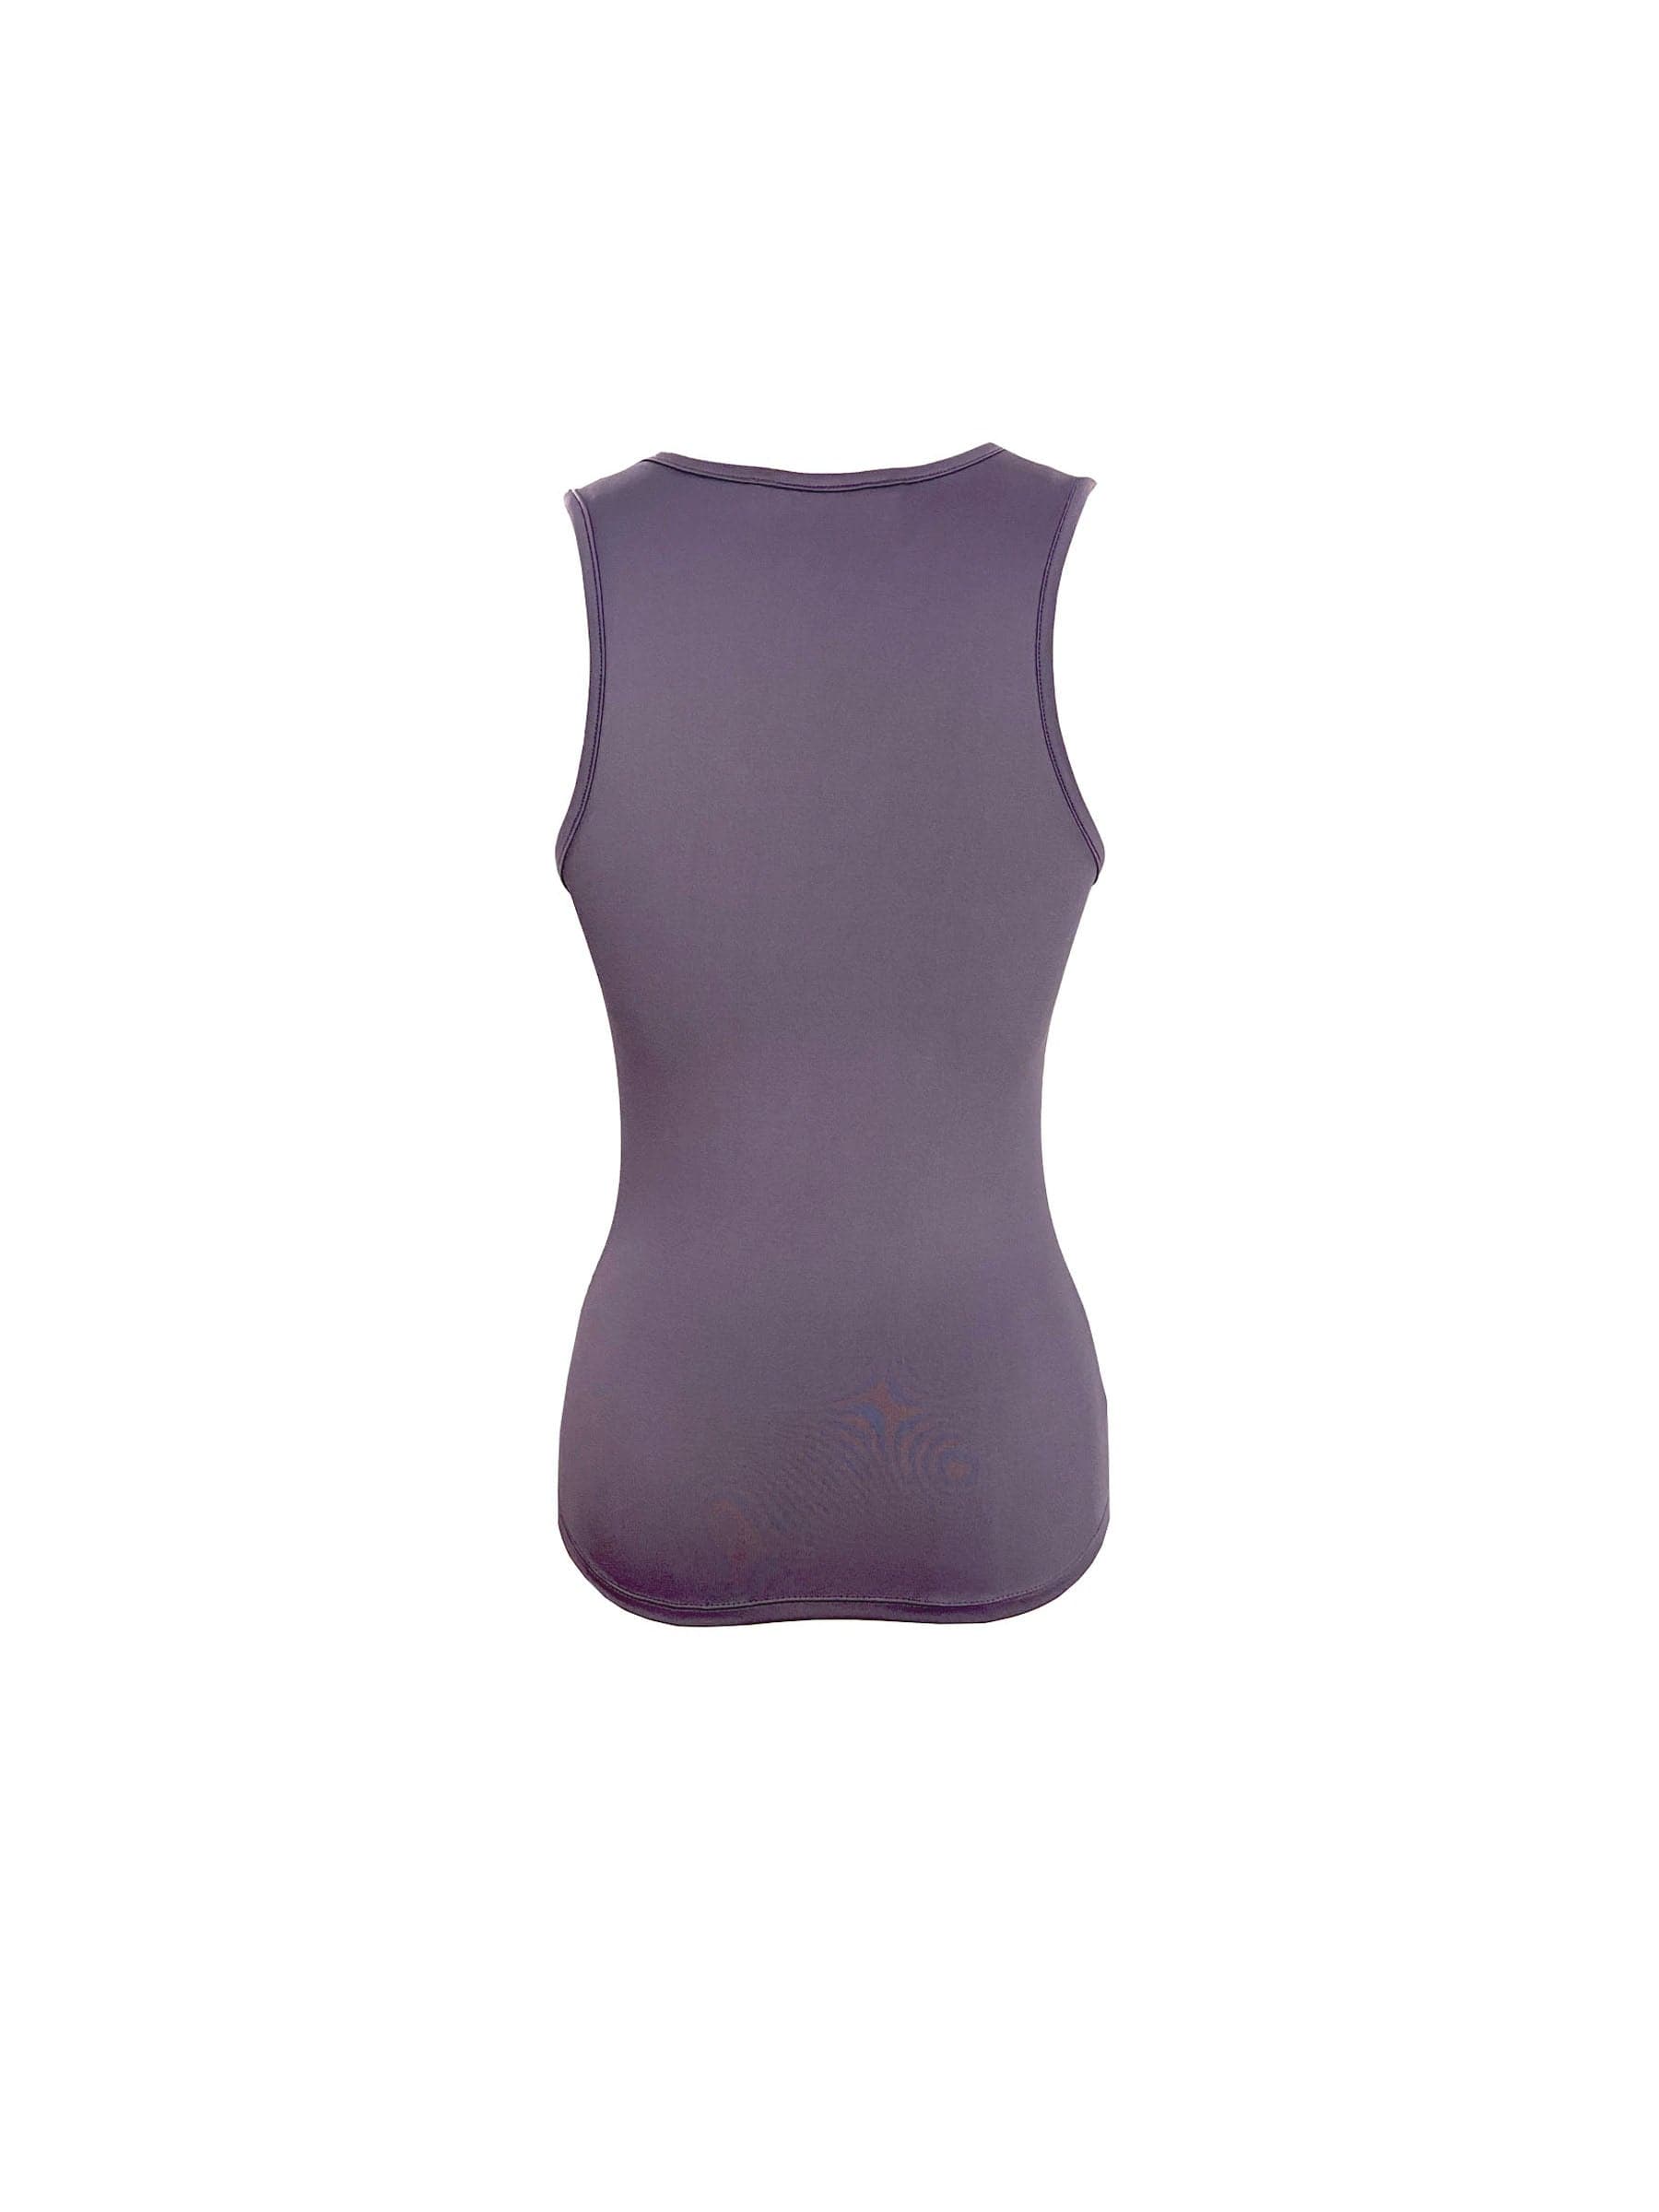 RECYCLED POLY PURPLE CORSET TANK TOP